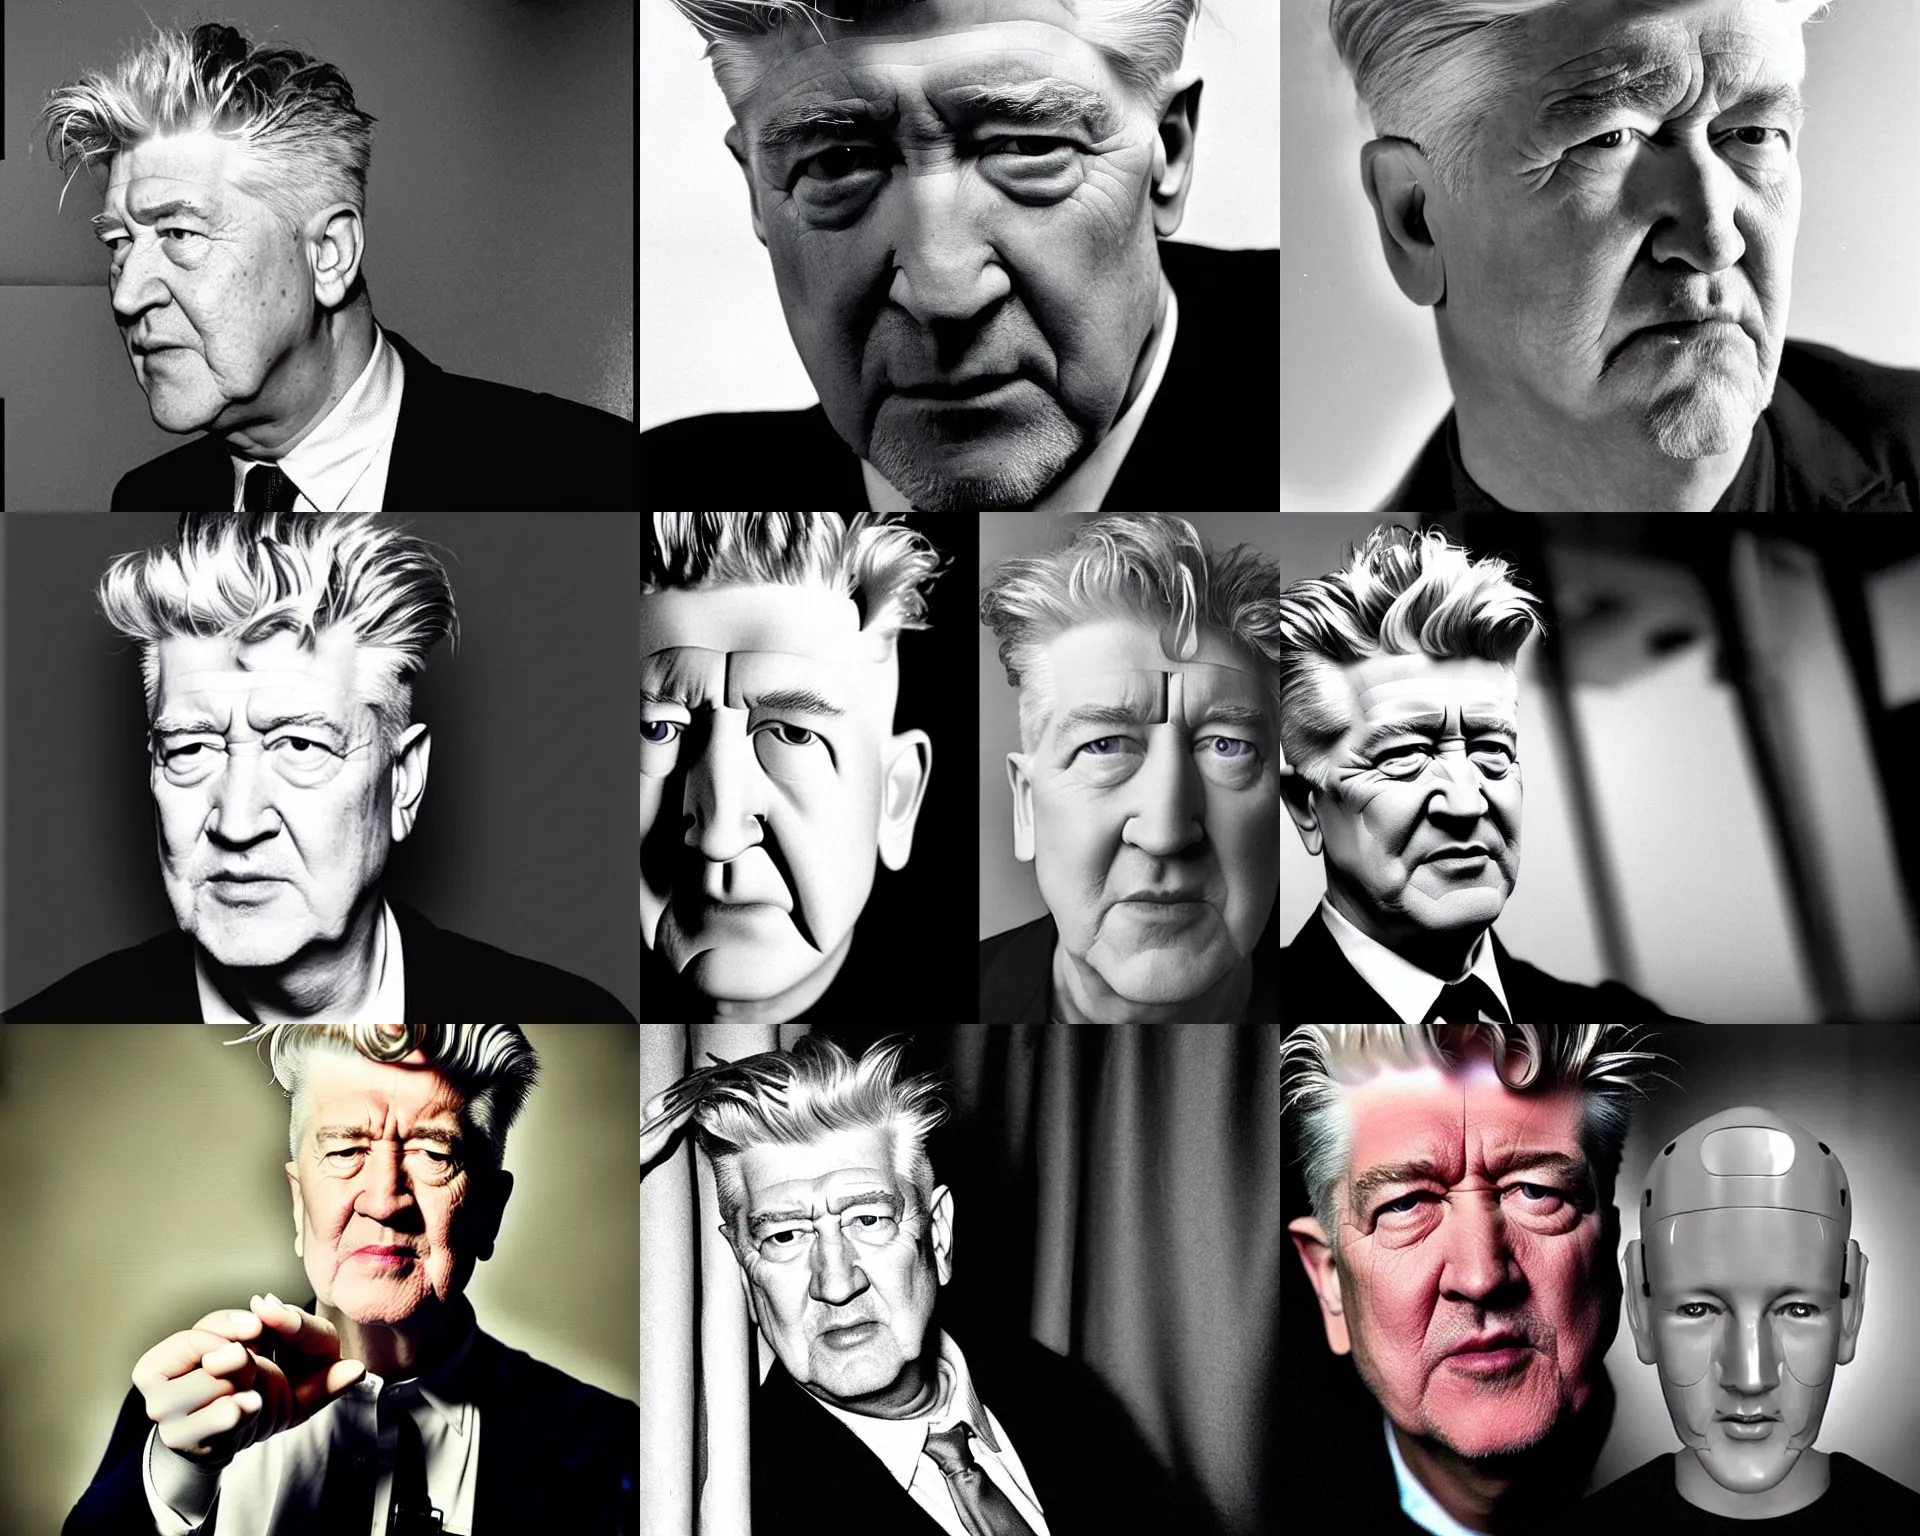 Prompt: David Lynch is an artificial face, an artificial mind. This is a very interesting picture of David Lynch, he The artificial face is what Orwell would have been talking about the mask is a mask of artificial intelligence artificial image of the man in the mask is unsettling. A look into the future of the artificial man? The fake Orwell looks real on the face of the man The man with the machine face is an icon. the cyborg face of Tony Rich The mask of an artificial orw is a perfect The real genius of the man behind the mask is that The facial prosthetic on Tony's face is artificial. The artificial person in the picture is Walter Benjamin Tony's artificial brain is a product of the future, The artificial face of Tony Ritchie makes me feel like I just can't decide whether the head on the robot The bald man with a robot face is the real- What a baldwin face.